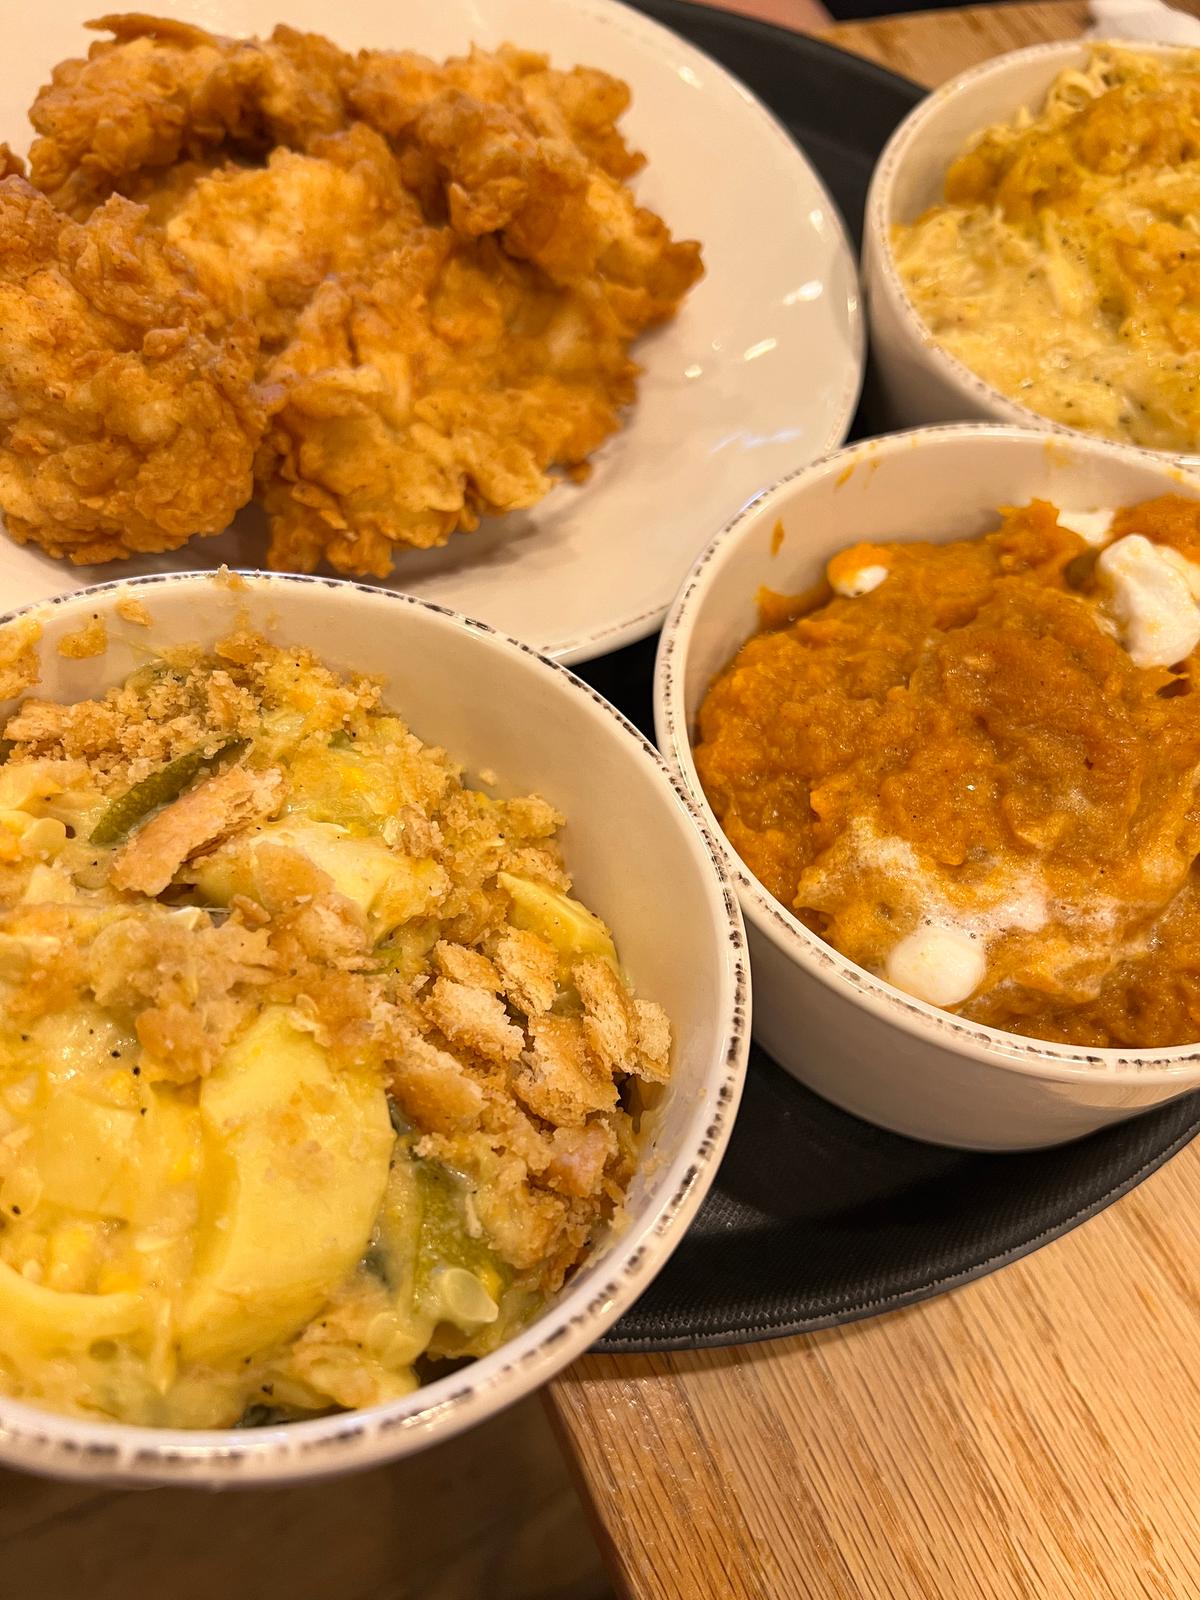 The cuisine at Sawmill Place Kitchen and Market is Southern to the core. With dishes including squash casserole, chicken casserole, collard greens, biscuits and cornbread, Sawmill Place is one of the most popular restaurants in Blairsville. (Mary Ann Anderson/TNS)